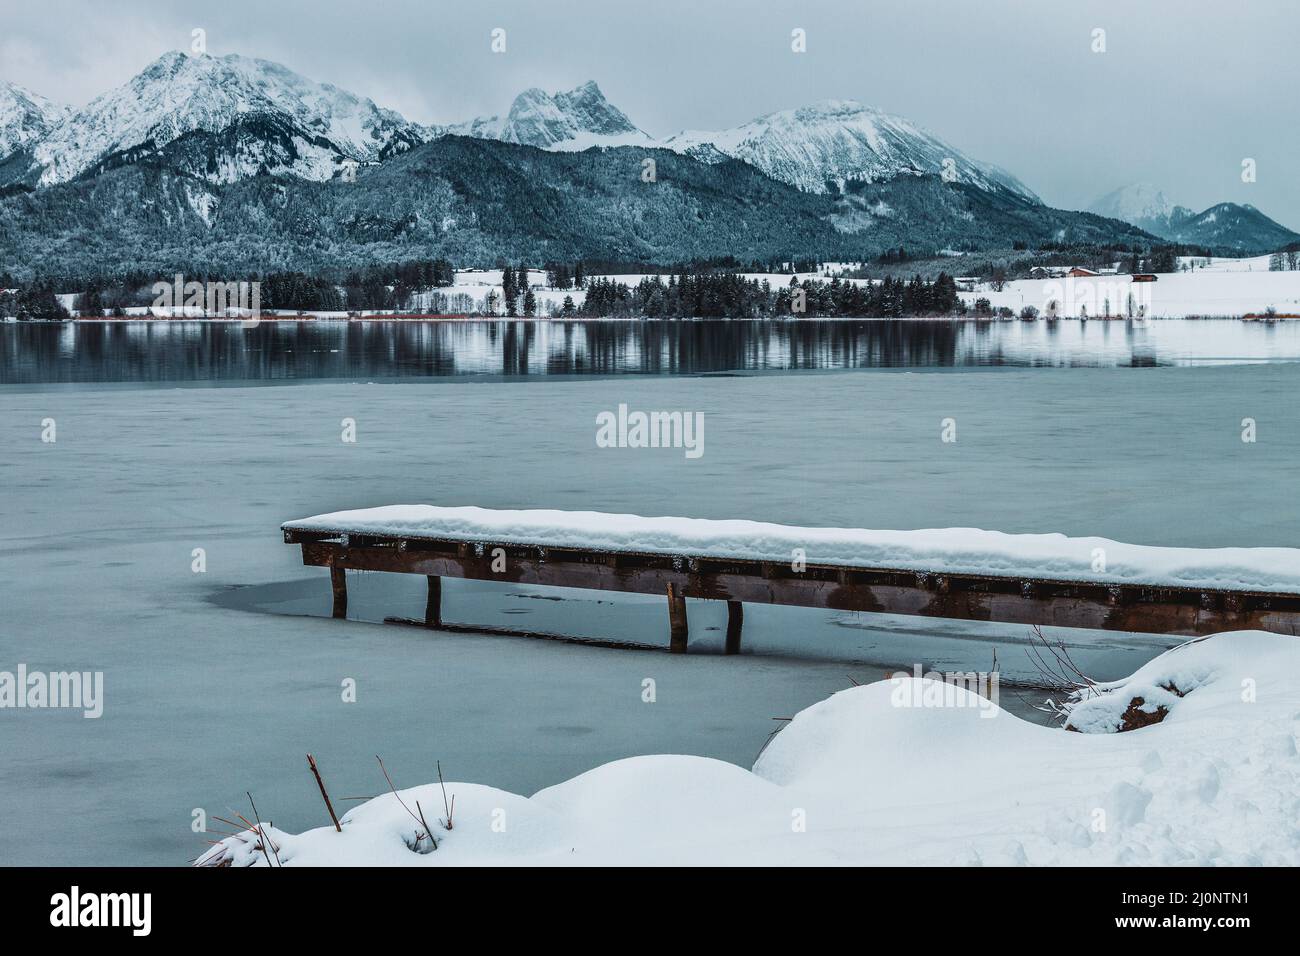 The Hopfensee with the AllgÃ¤u Alps in winter. Germany. Stock Photo